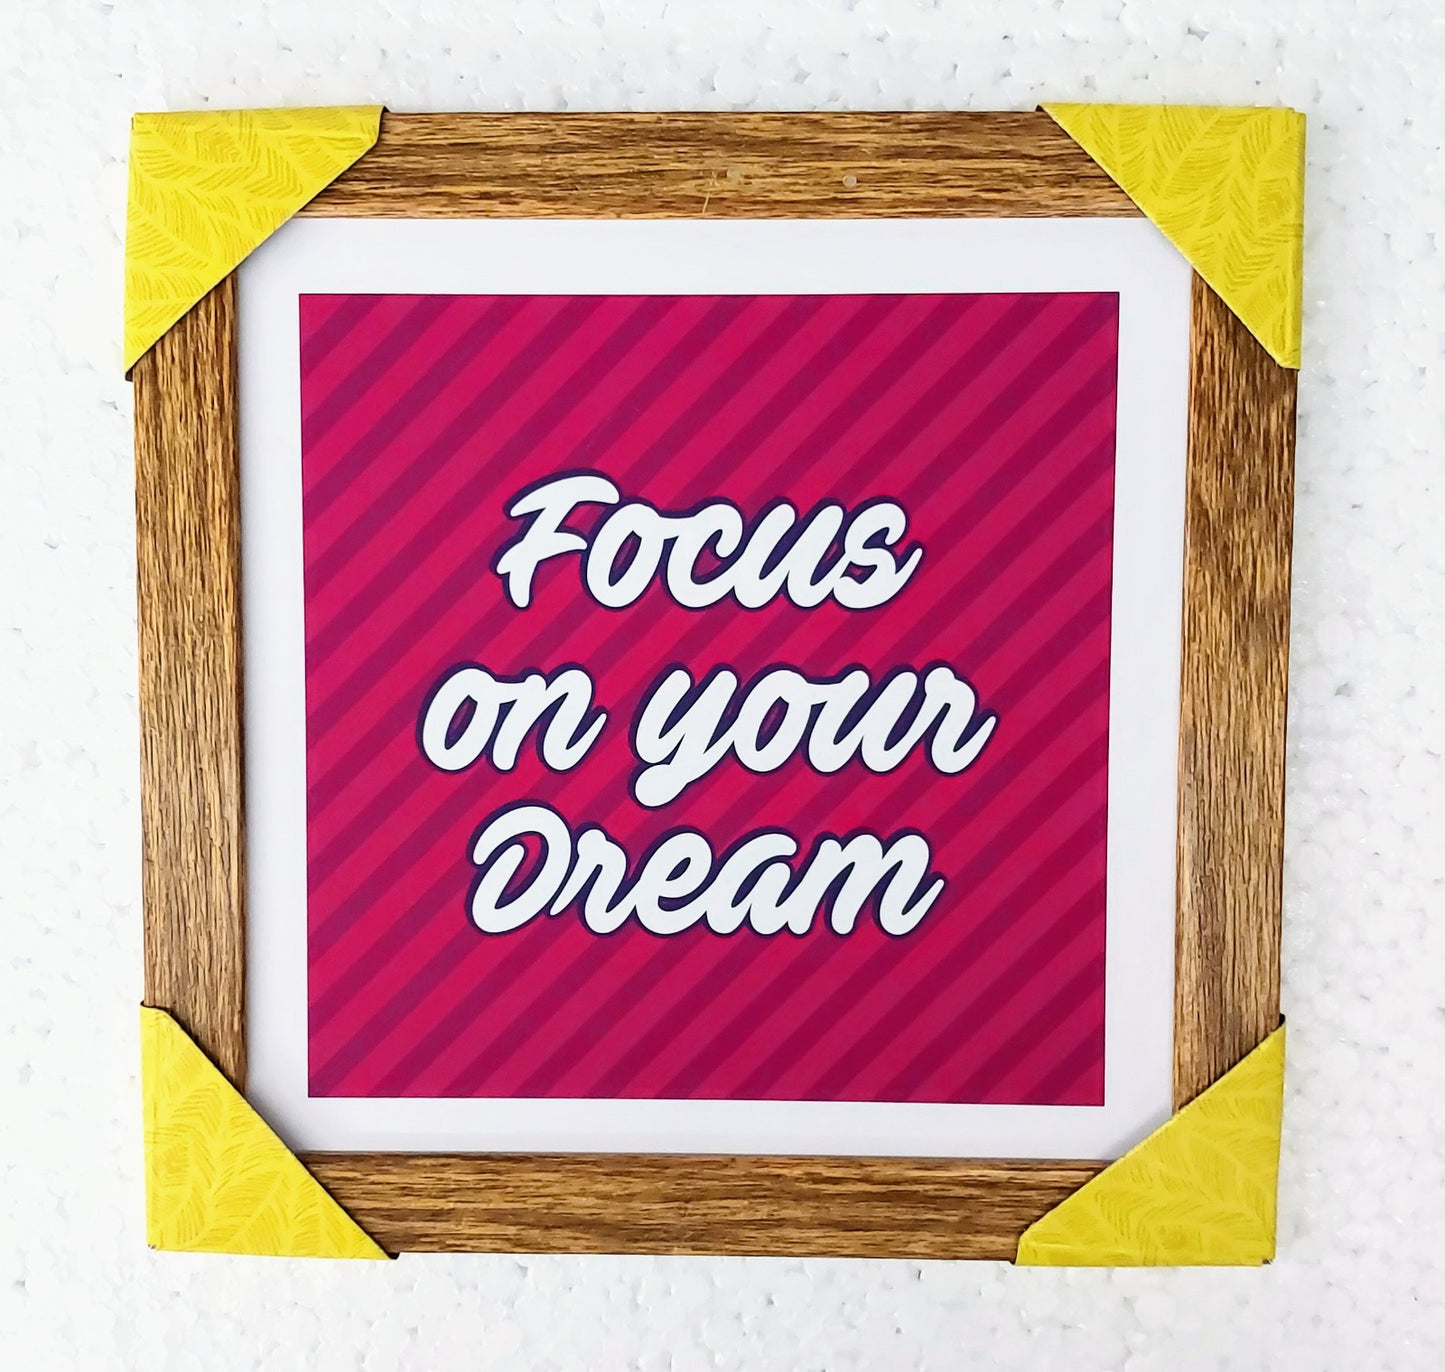 Motivational Wall Décor Frame | Wall Quotes Frames for Bedroom | Motivational Quotes Frames with Waterproof Poster and Digital Print (8X8 Inch, 1Pcs)